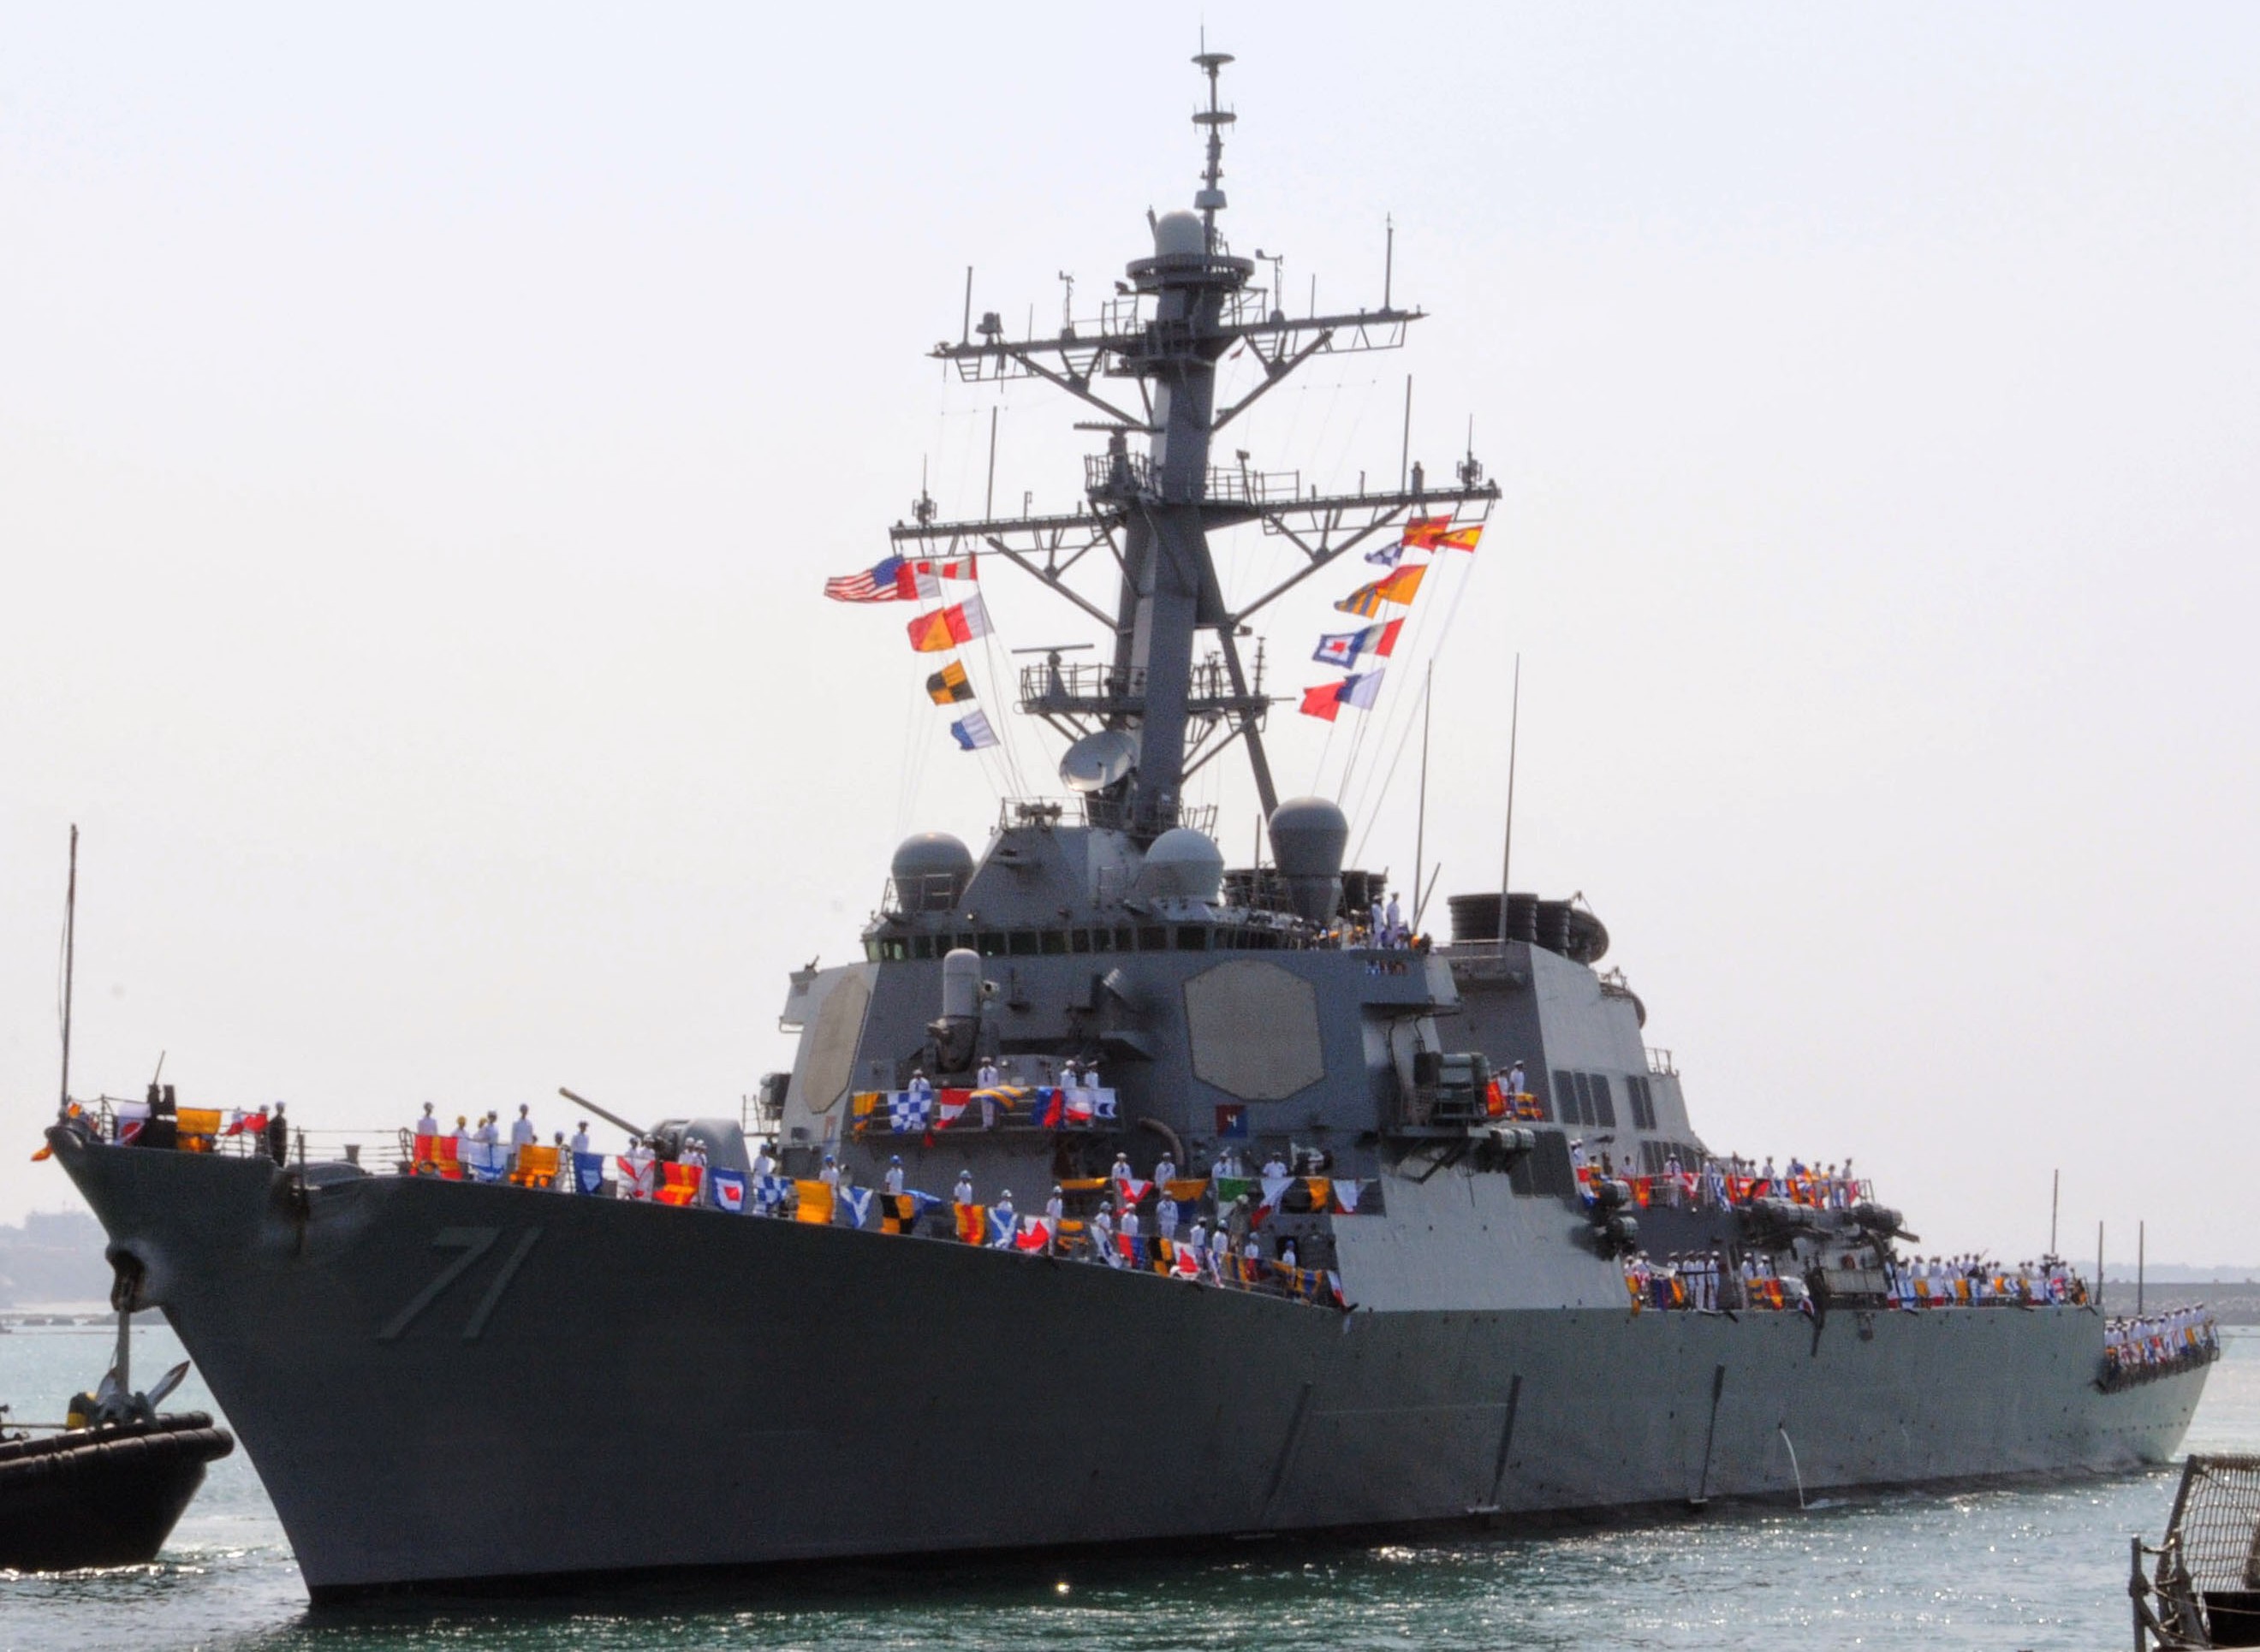 ddg-71 uss ross guided missile destroyer arleigh burke class aegis bmd 70